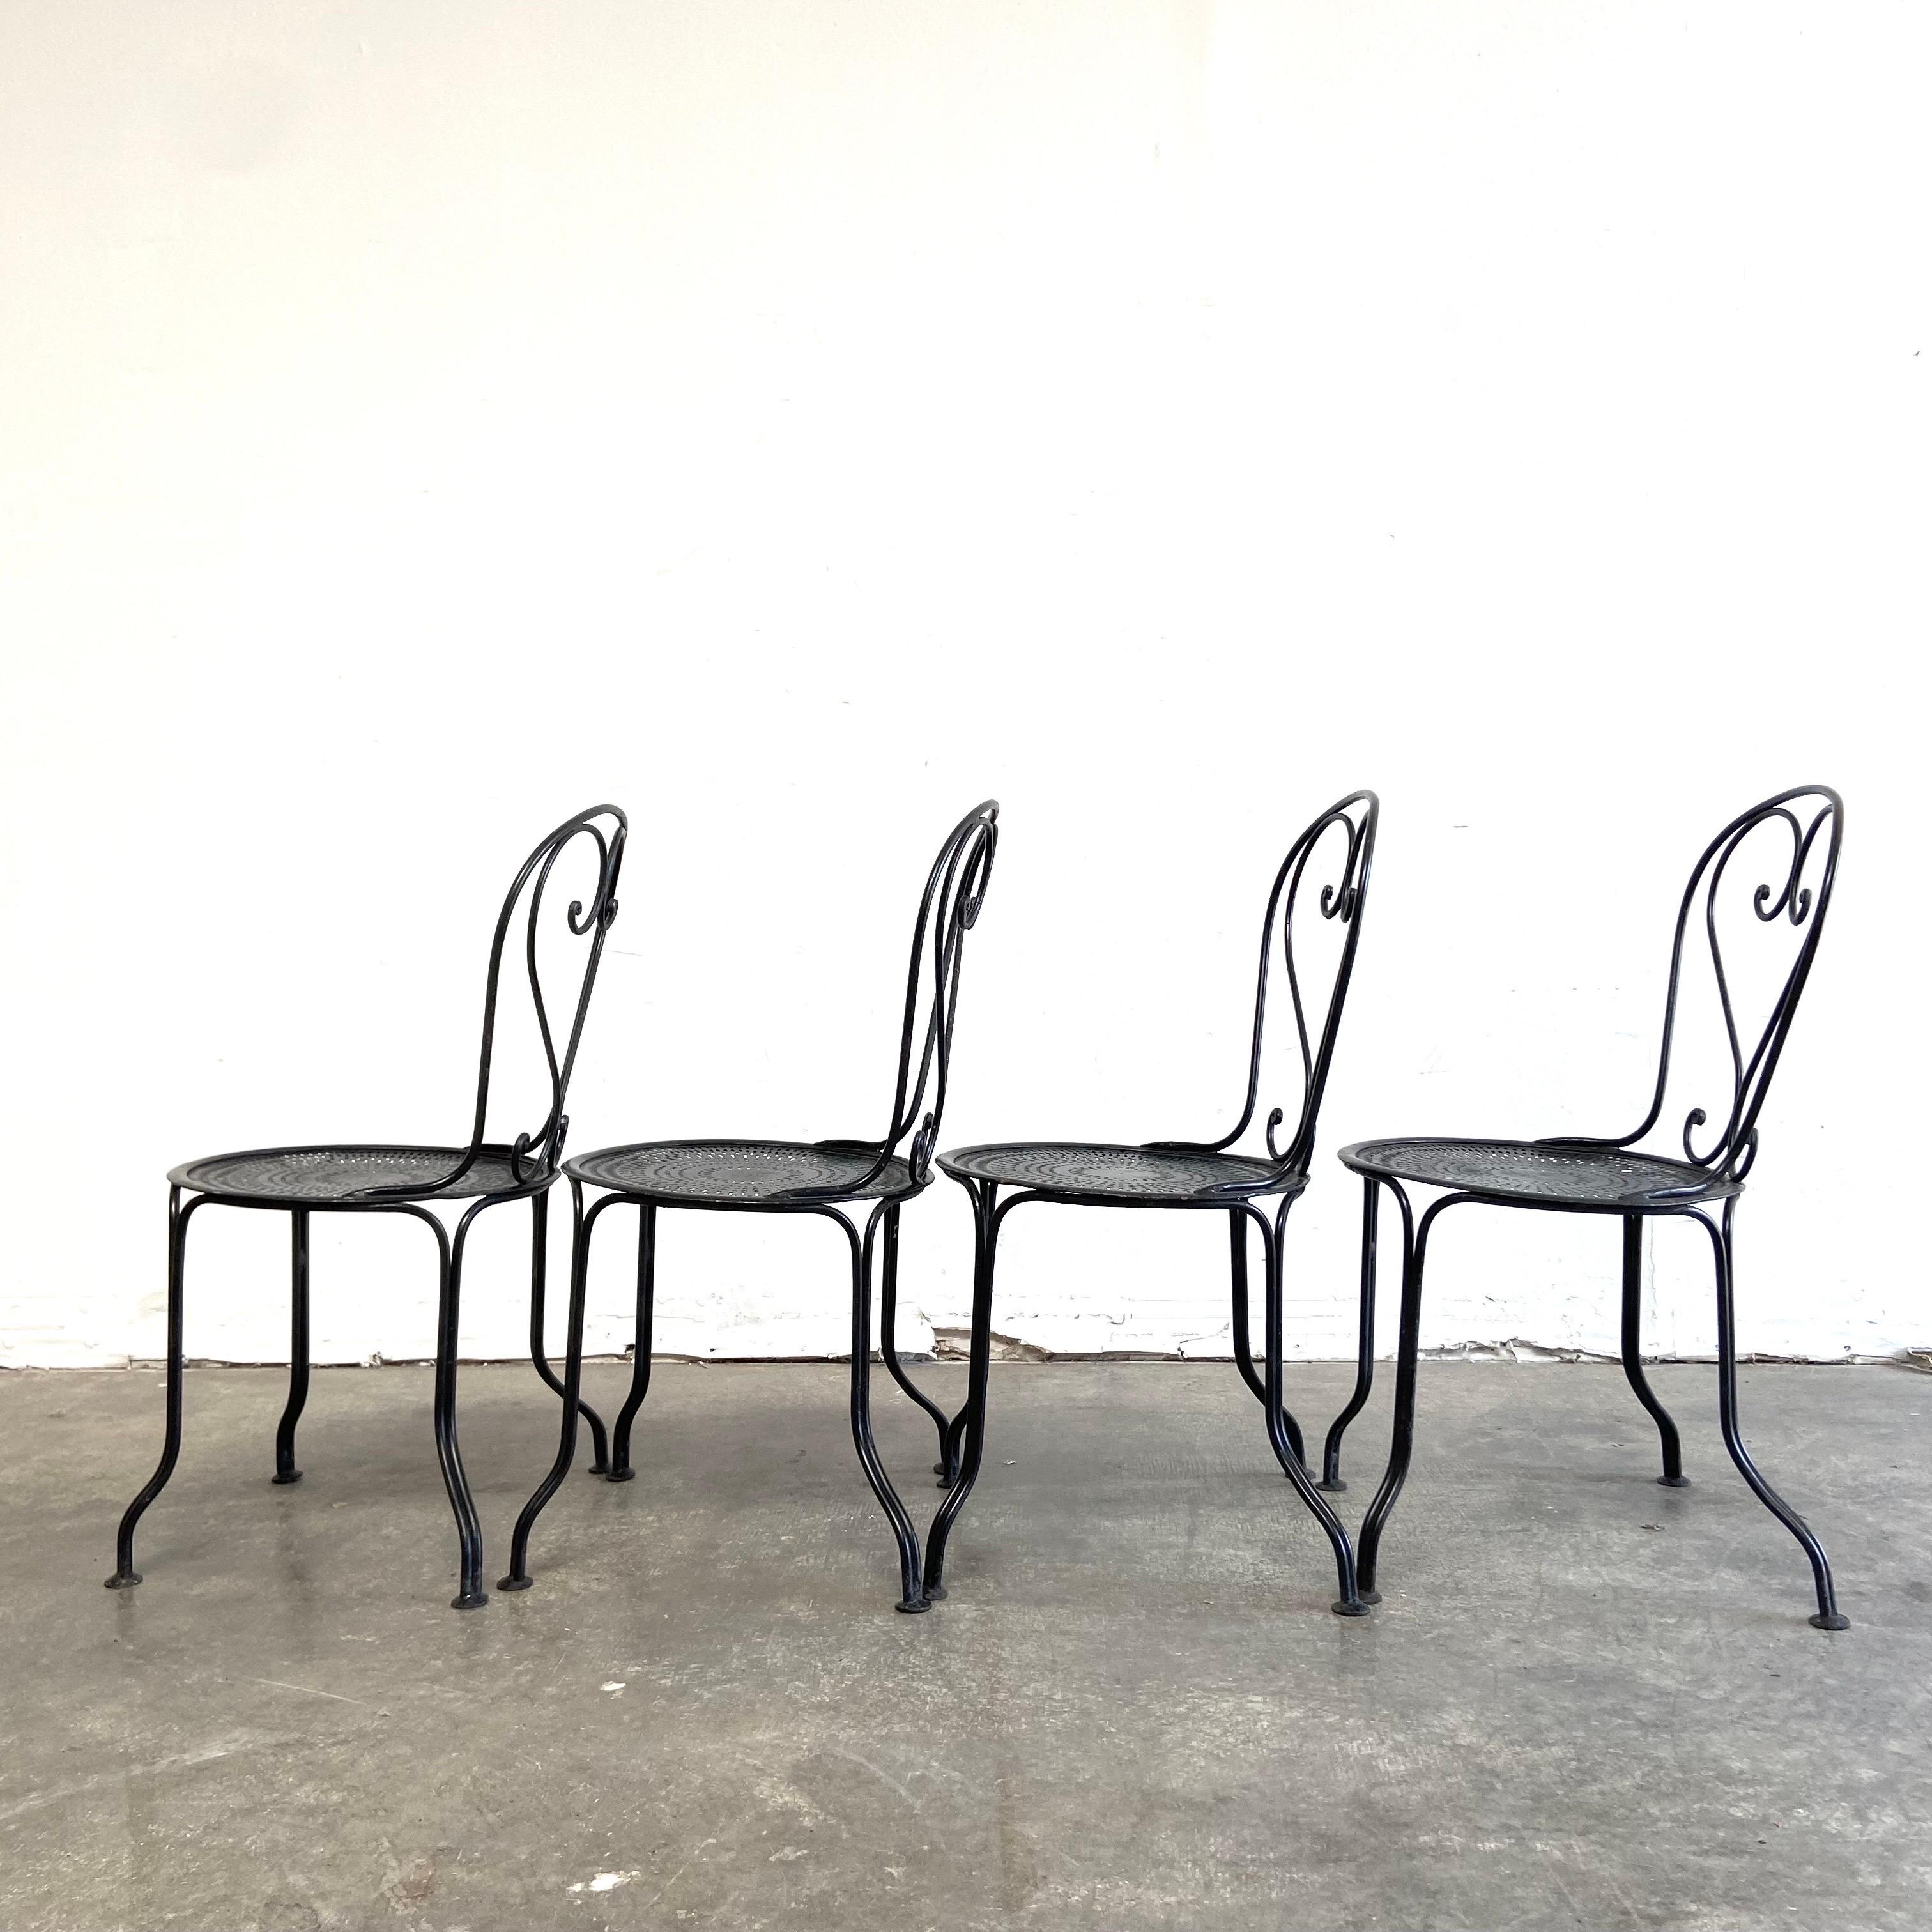 Set of 4 outdoor French iron dining chairs in black.
Overall each chair is in good condition, very solid and sturdy can be used for everyday inside or outside.
Origin: France
Size;
18”W x 18”D x 31”H 
Seat height: 16” 
Seat: 16”diameter.